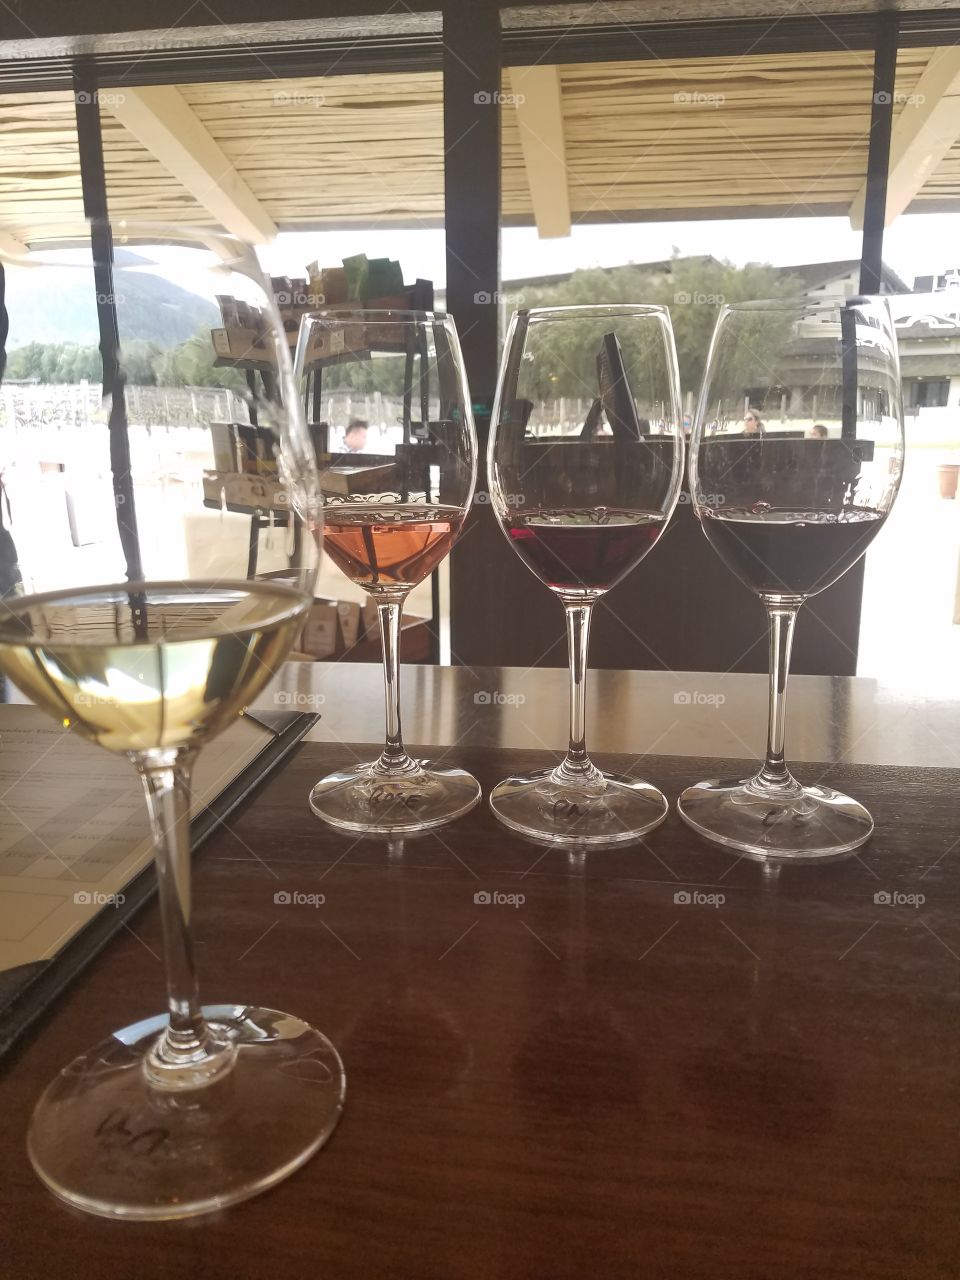 Bright flight of four wines in wine glasses at a winery